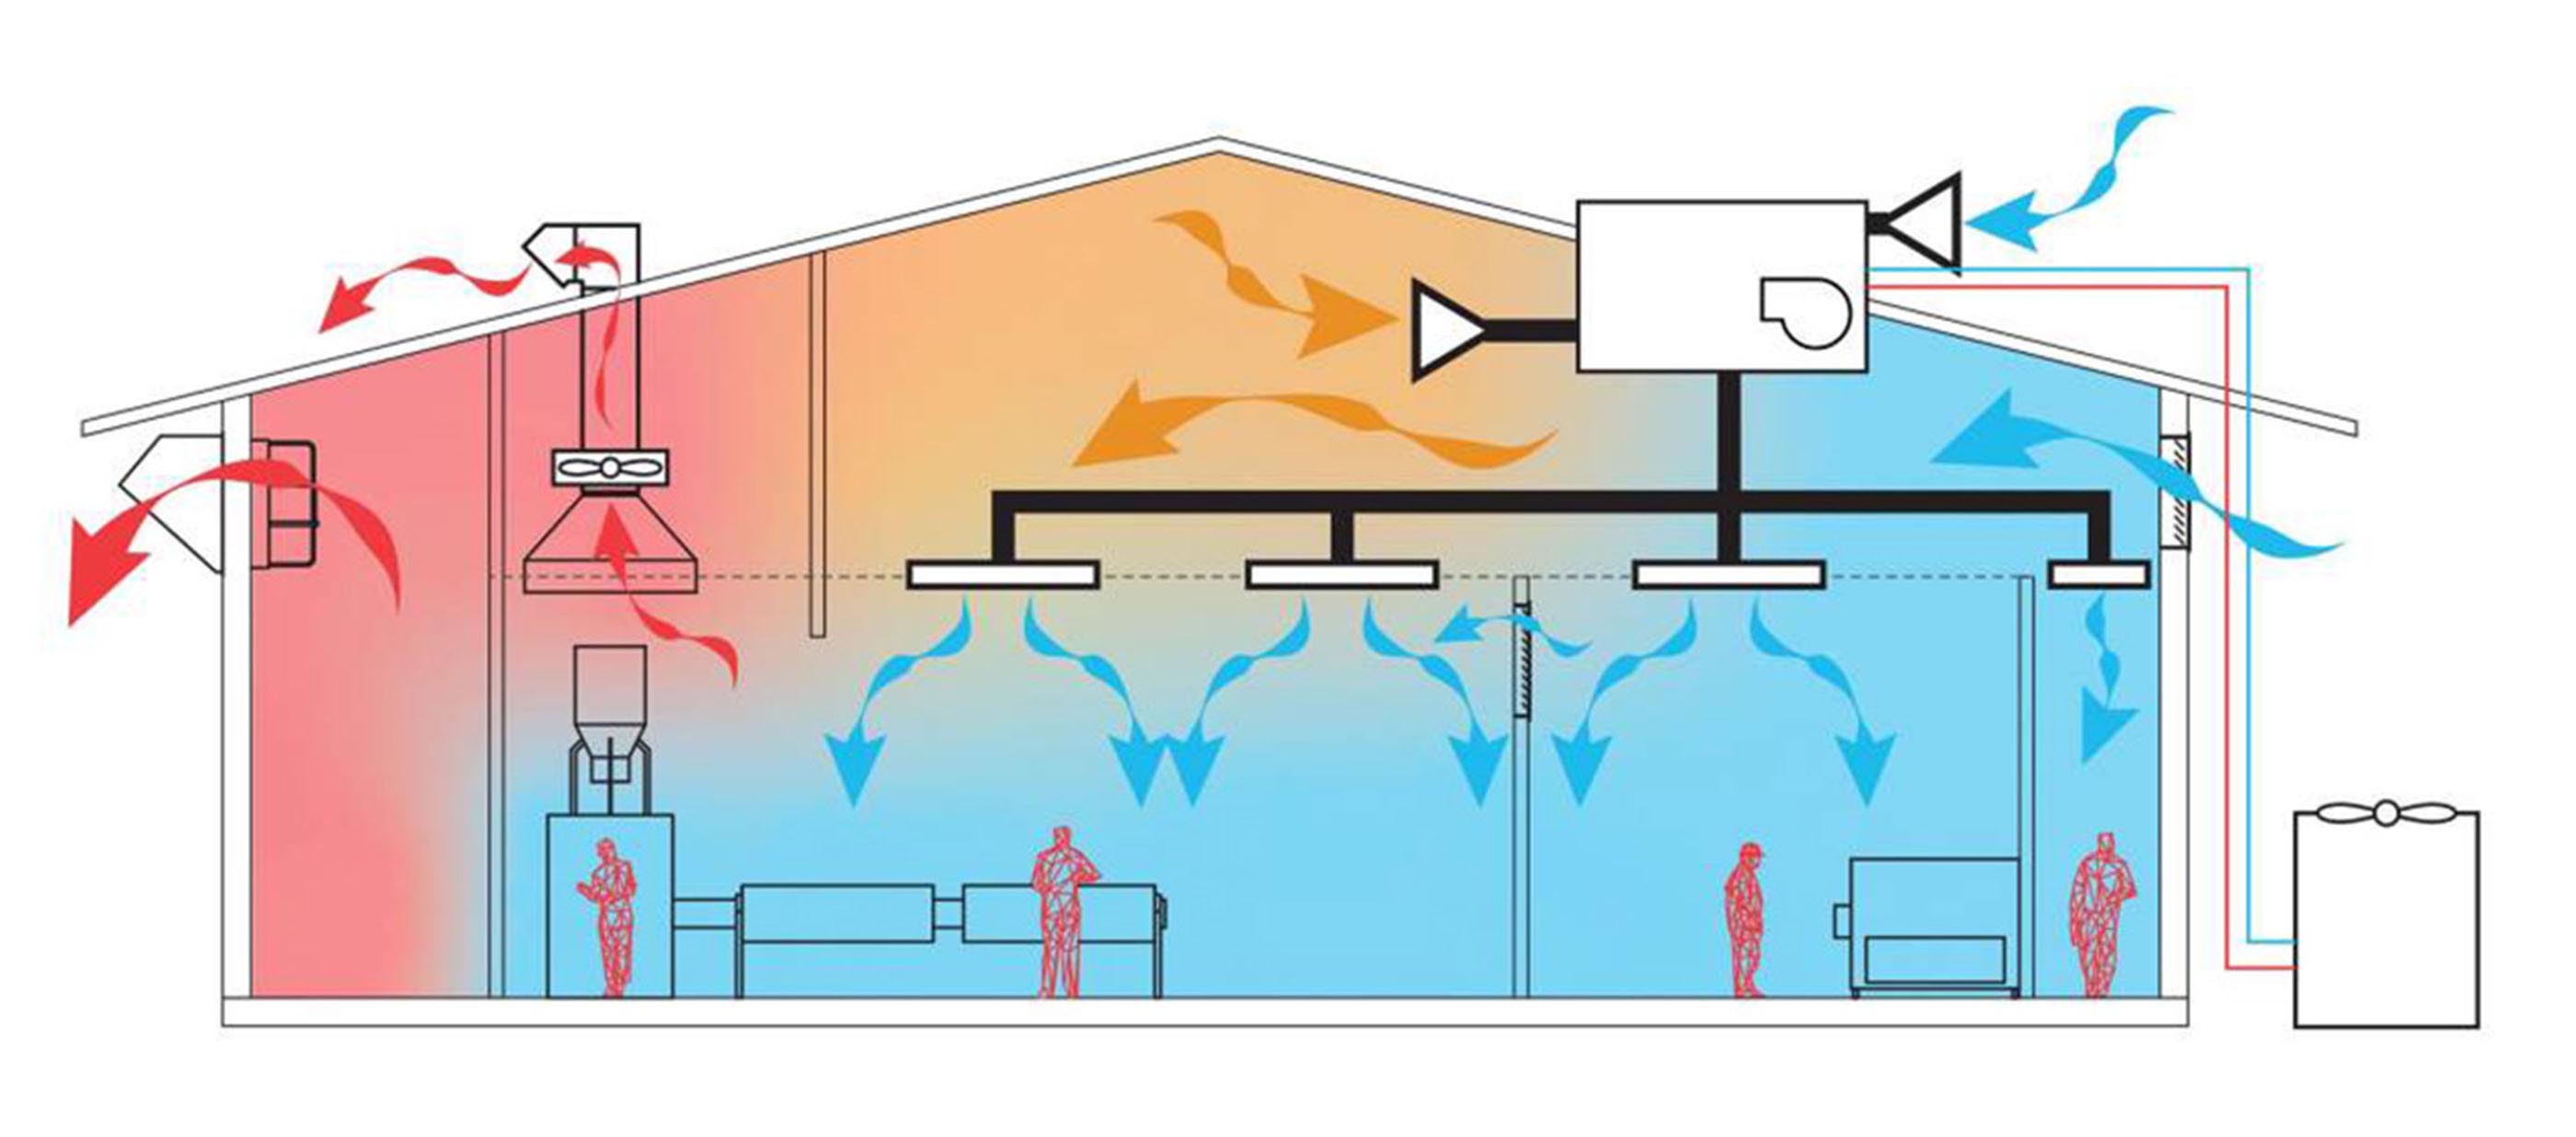 Graphic of a sample ventilation scheme for an industrial factory.